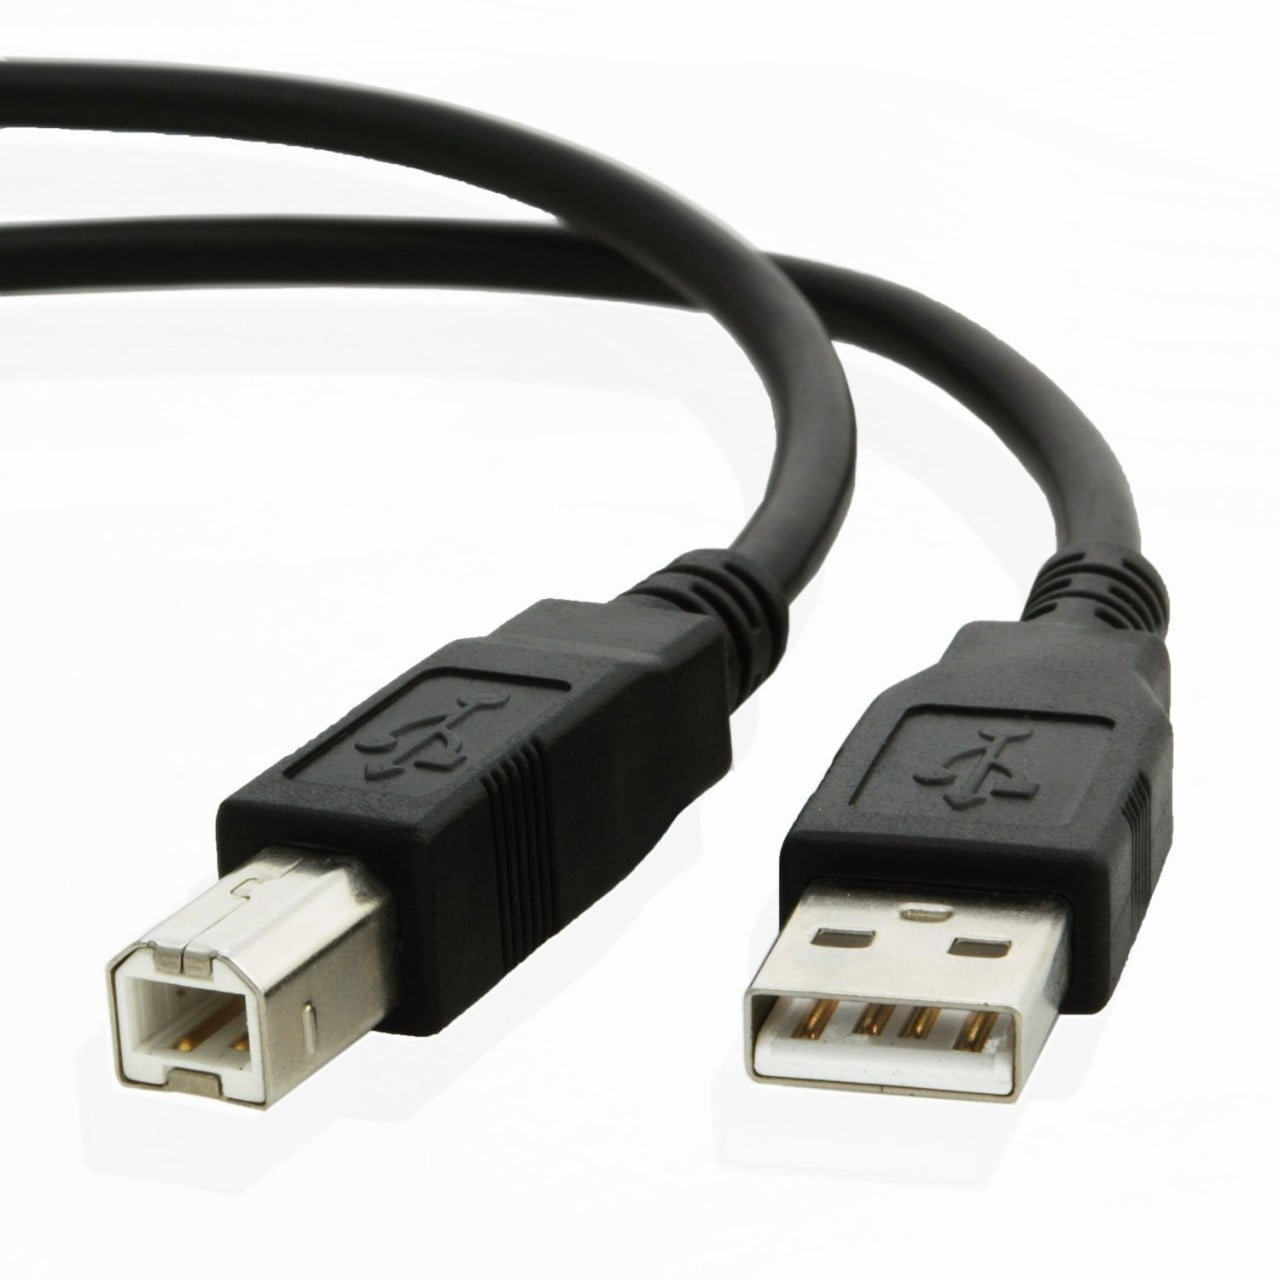 OMNIHIL 15 Feet Long High Speed USB 2.0 Cable Compatible with Epson Workforce Pro WF-5190